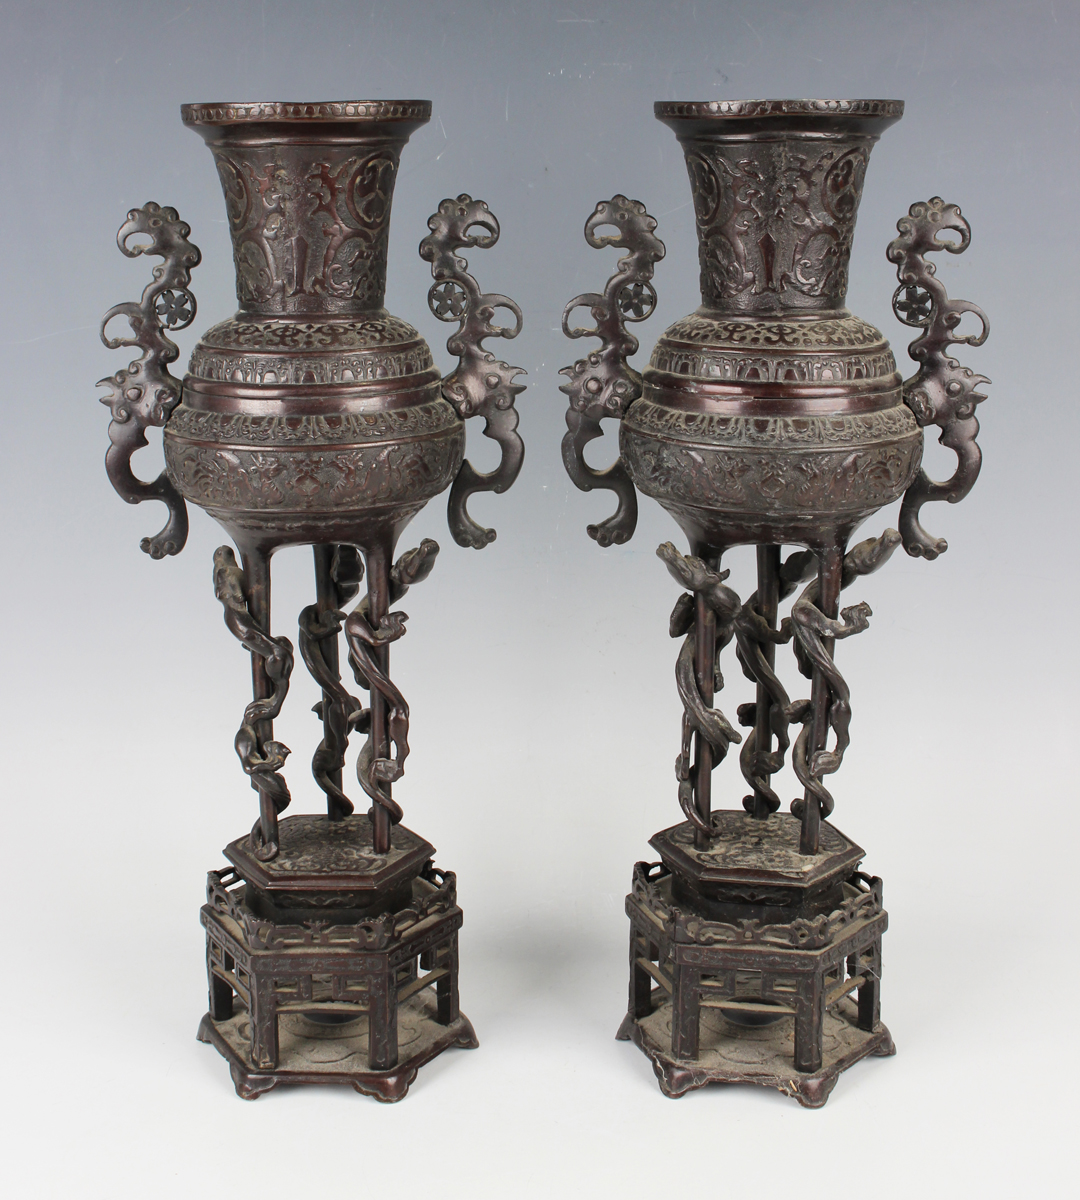 A pair of Japanese brown patinated bronze two-handled vases and integral stands, Meiji period,